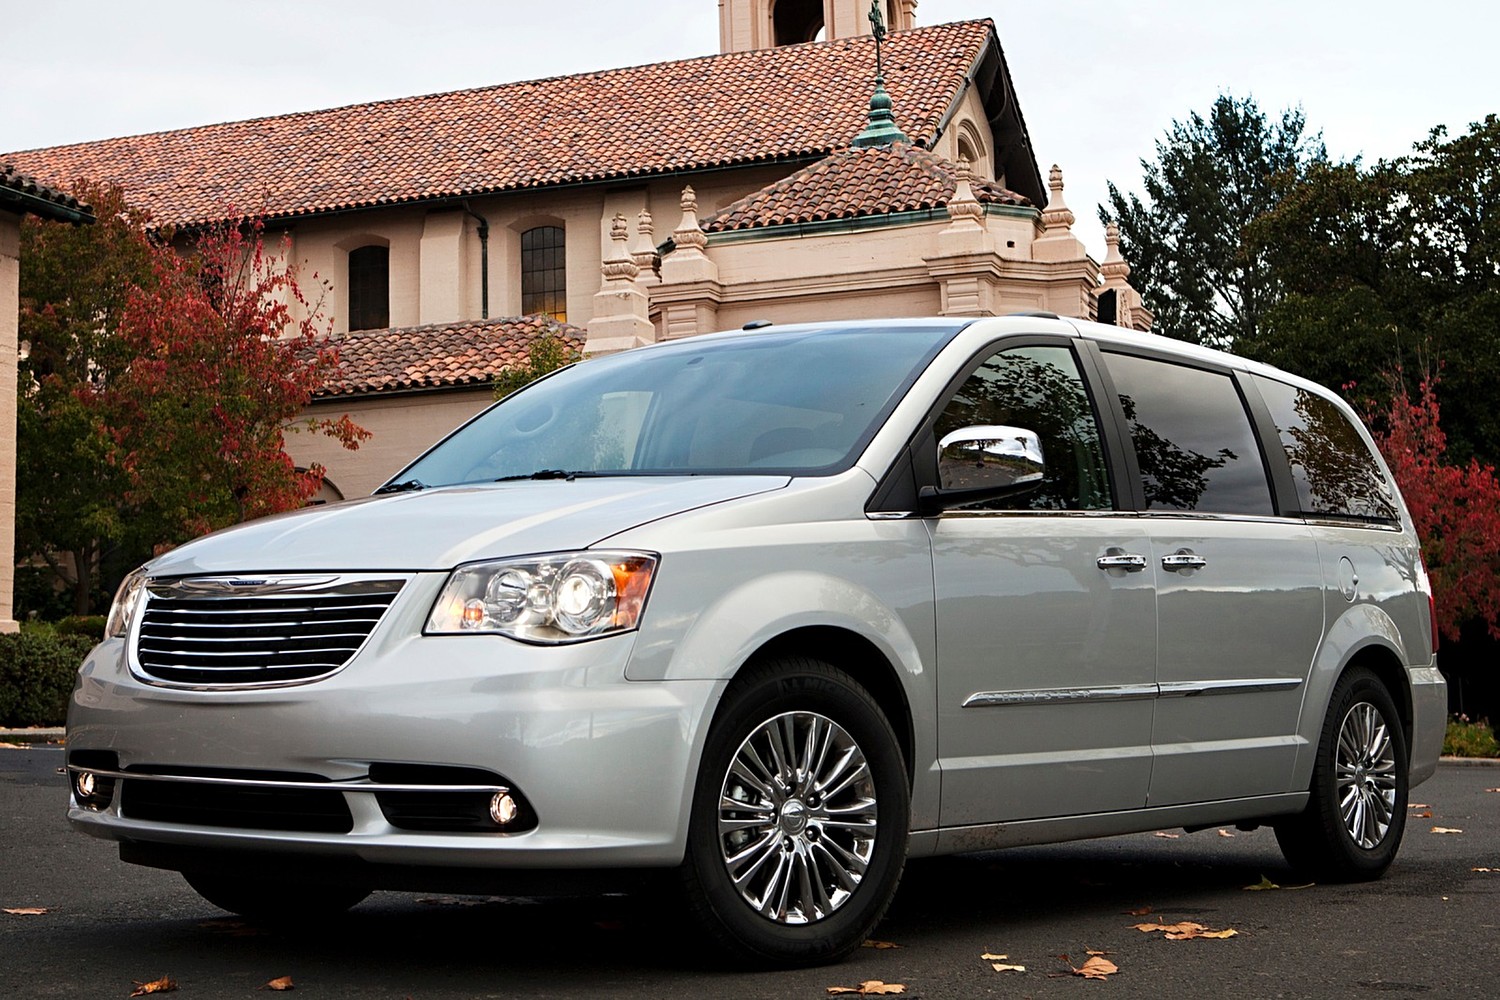 2016 Chrysler Town and Country Limited Passenger Minivan Exterior Shown